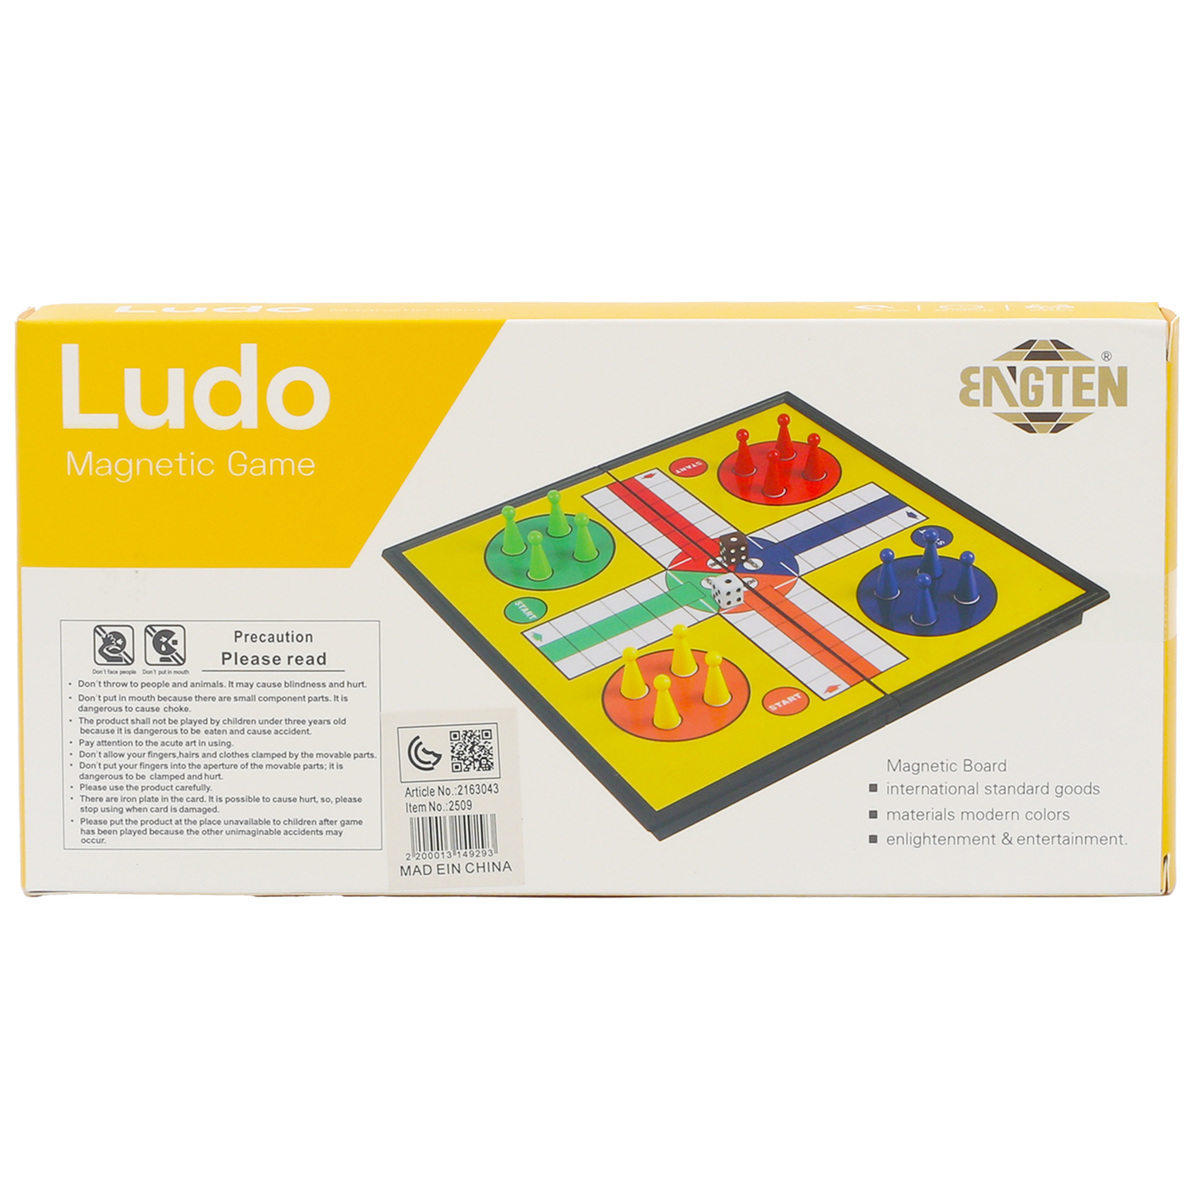 Skid Fusion Magnetic Ludo Game S-2509